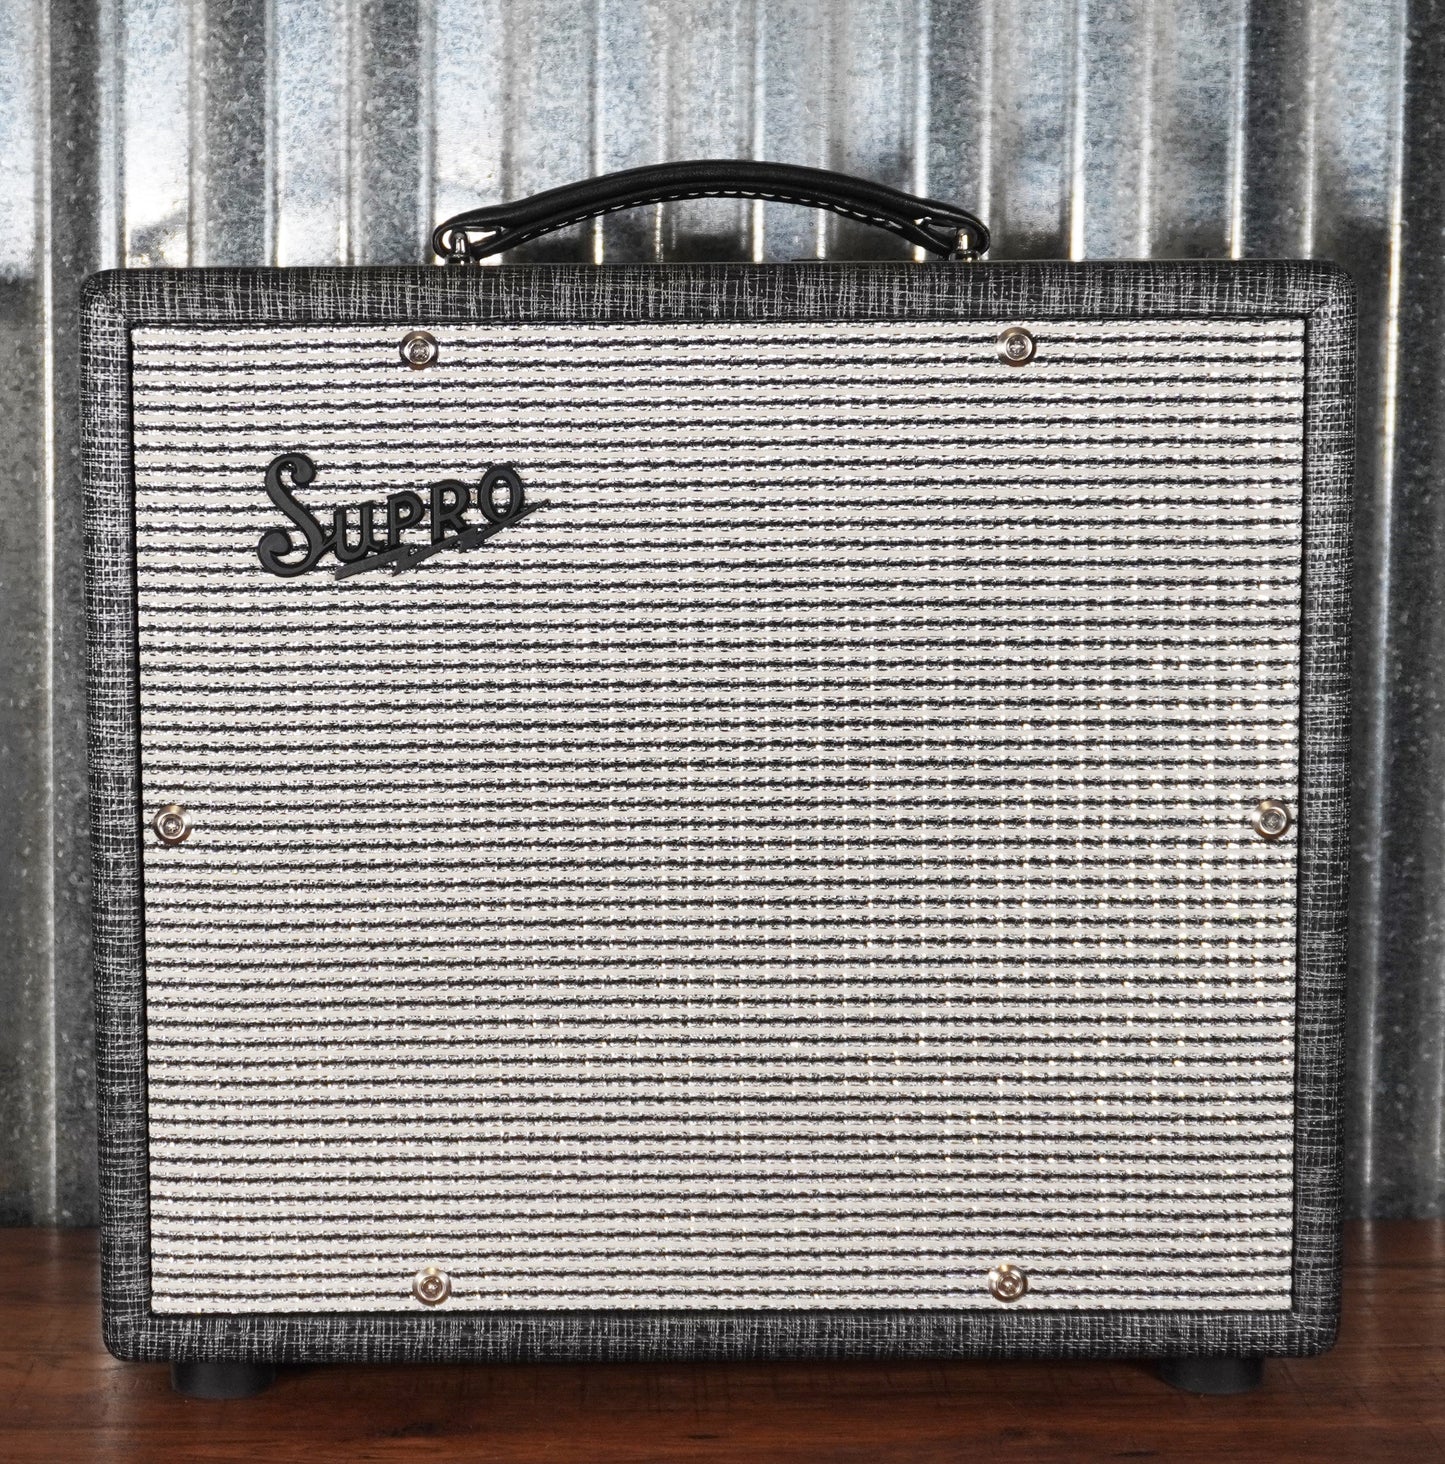 Supro USA 1600 Supreme 25 Watt 1x10" Two Channel All Tube Guitar Combo Amplifier Used